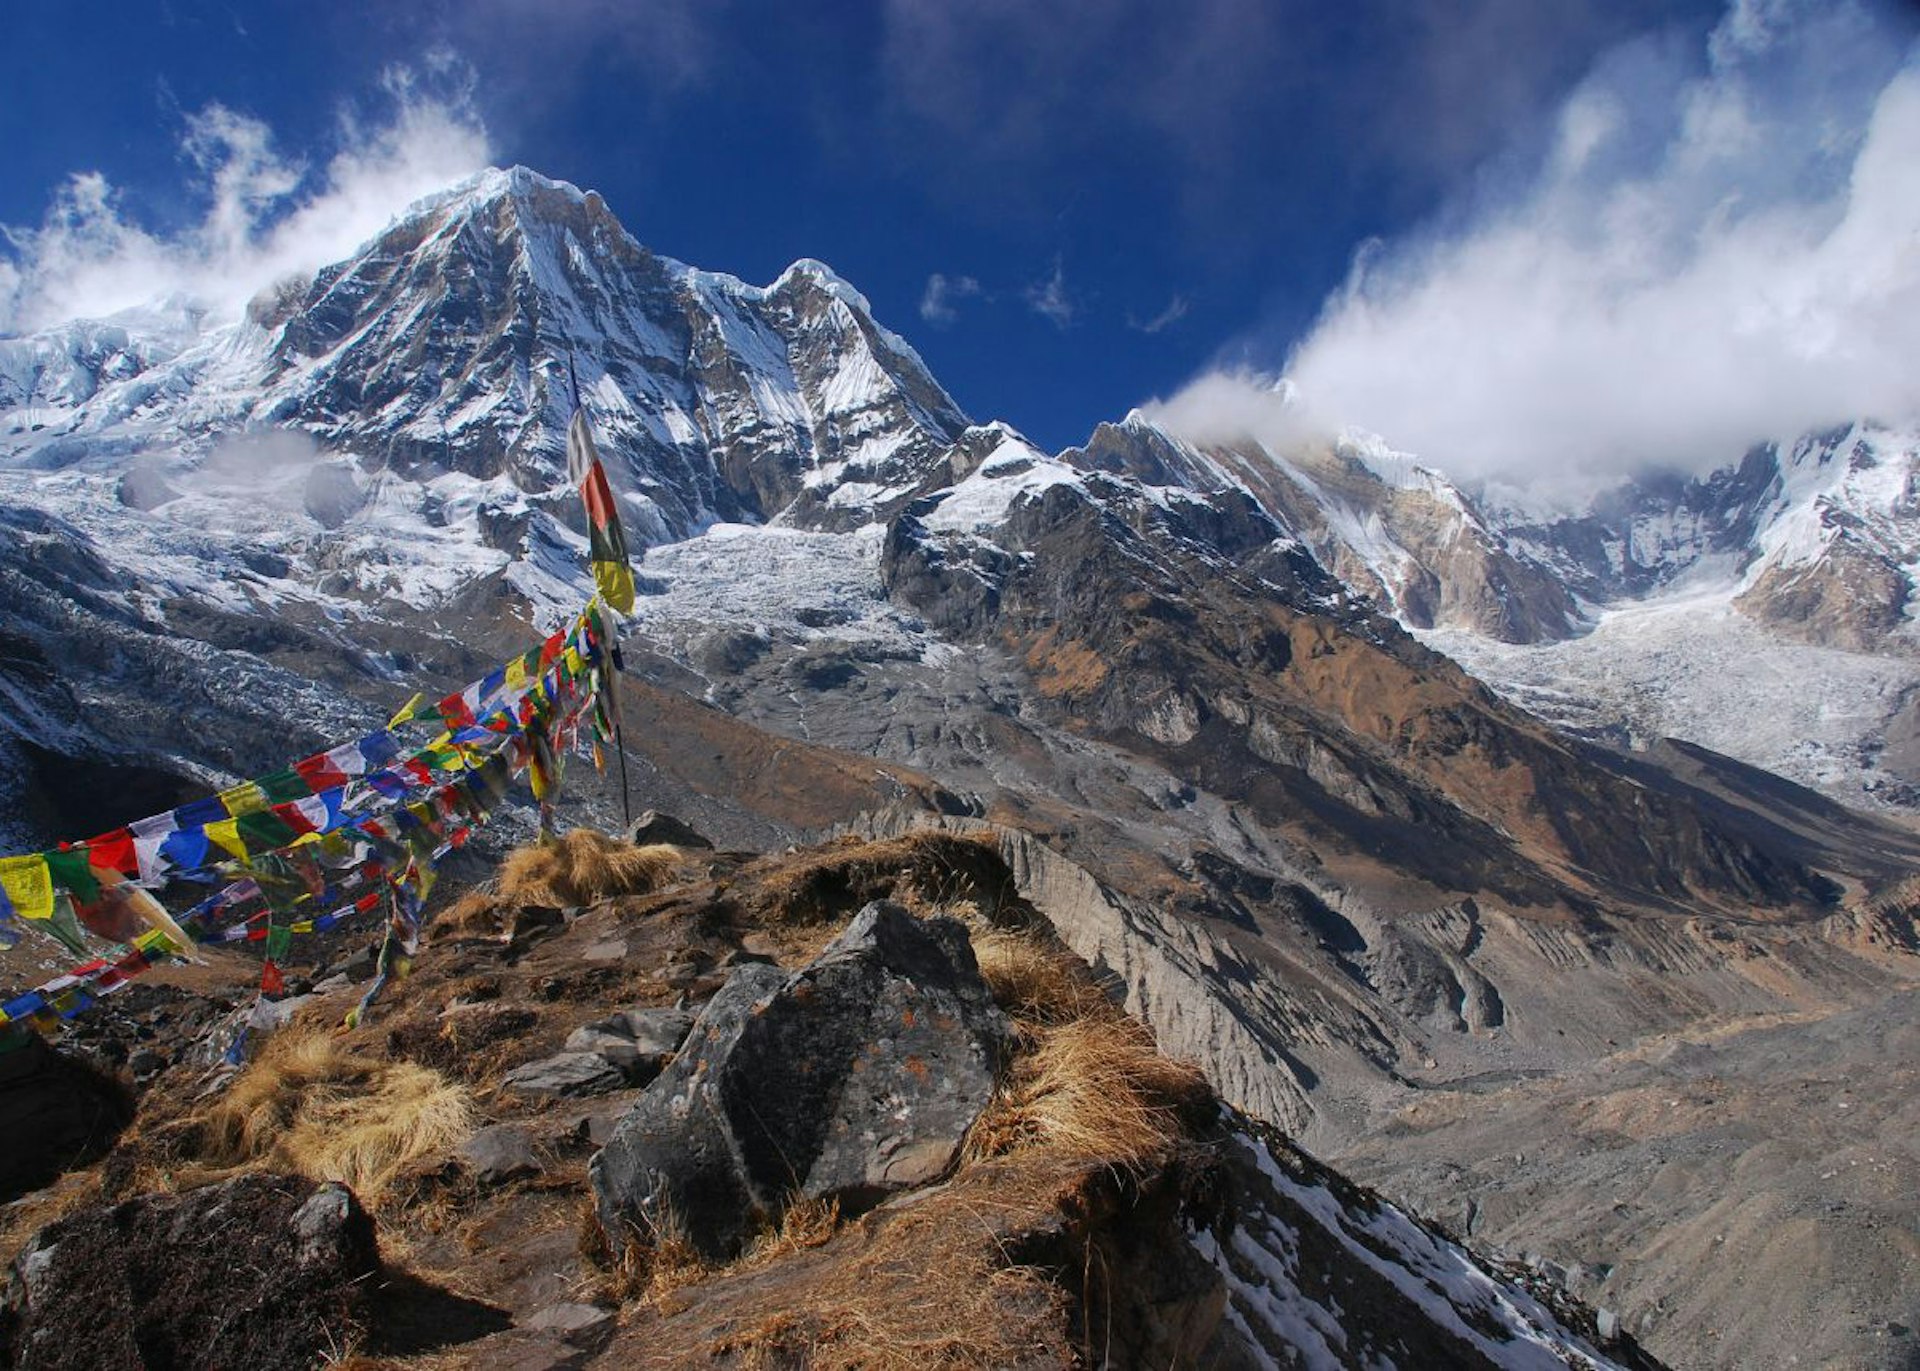 Clear weather at Annapurna Base Camp. Image by Vera & Jean-Christophe / CC BY-SA 2.0.